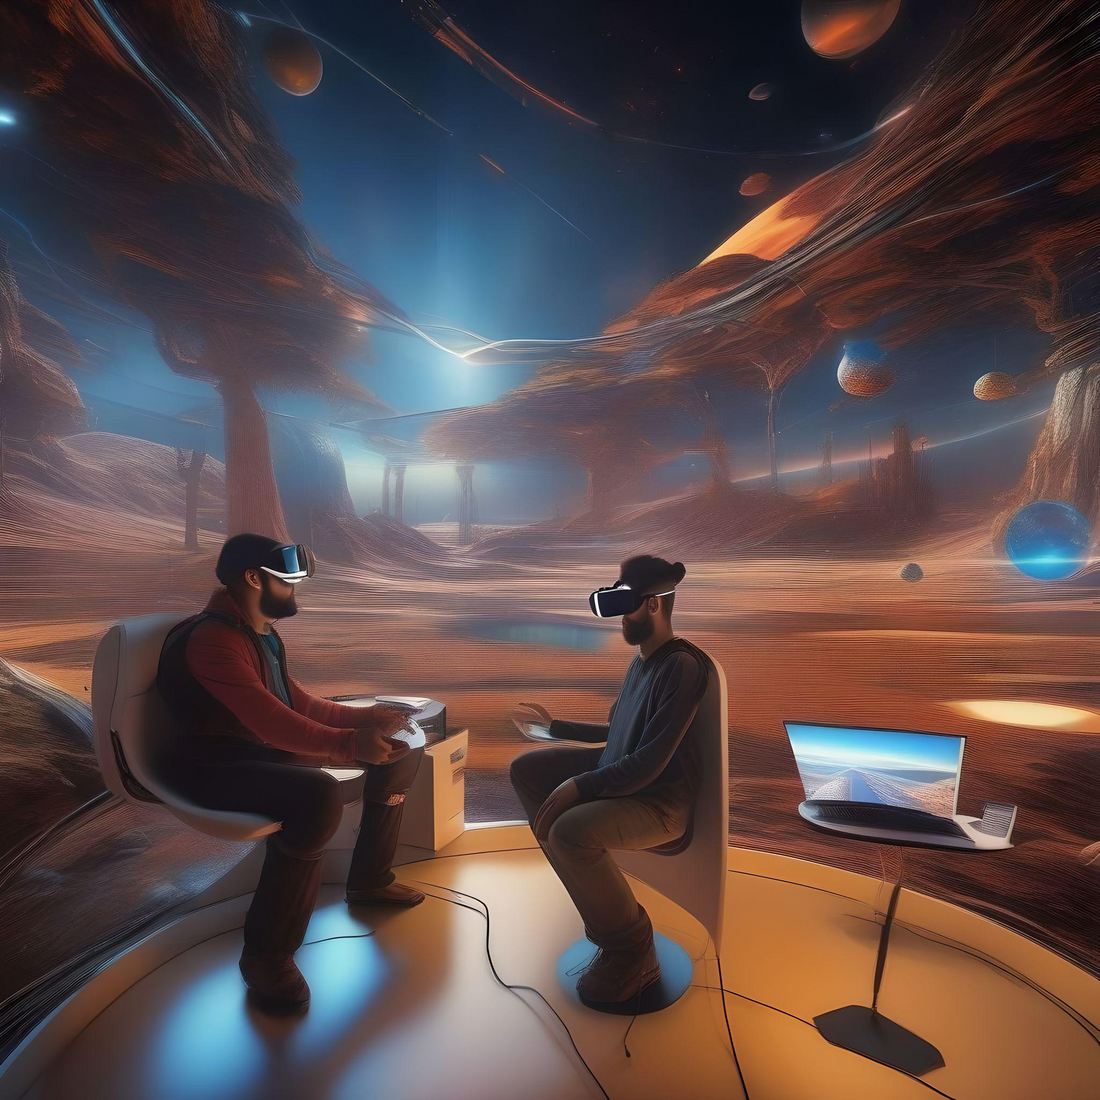 Where will Virtual Reality take us in the future?